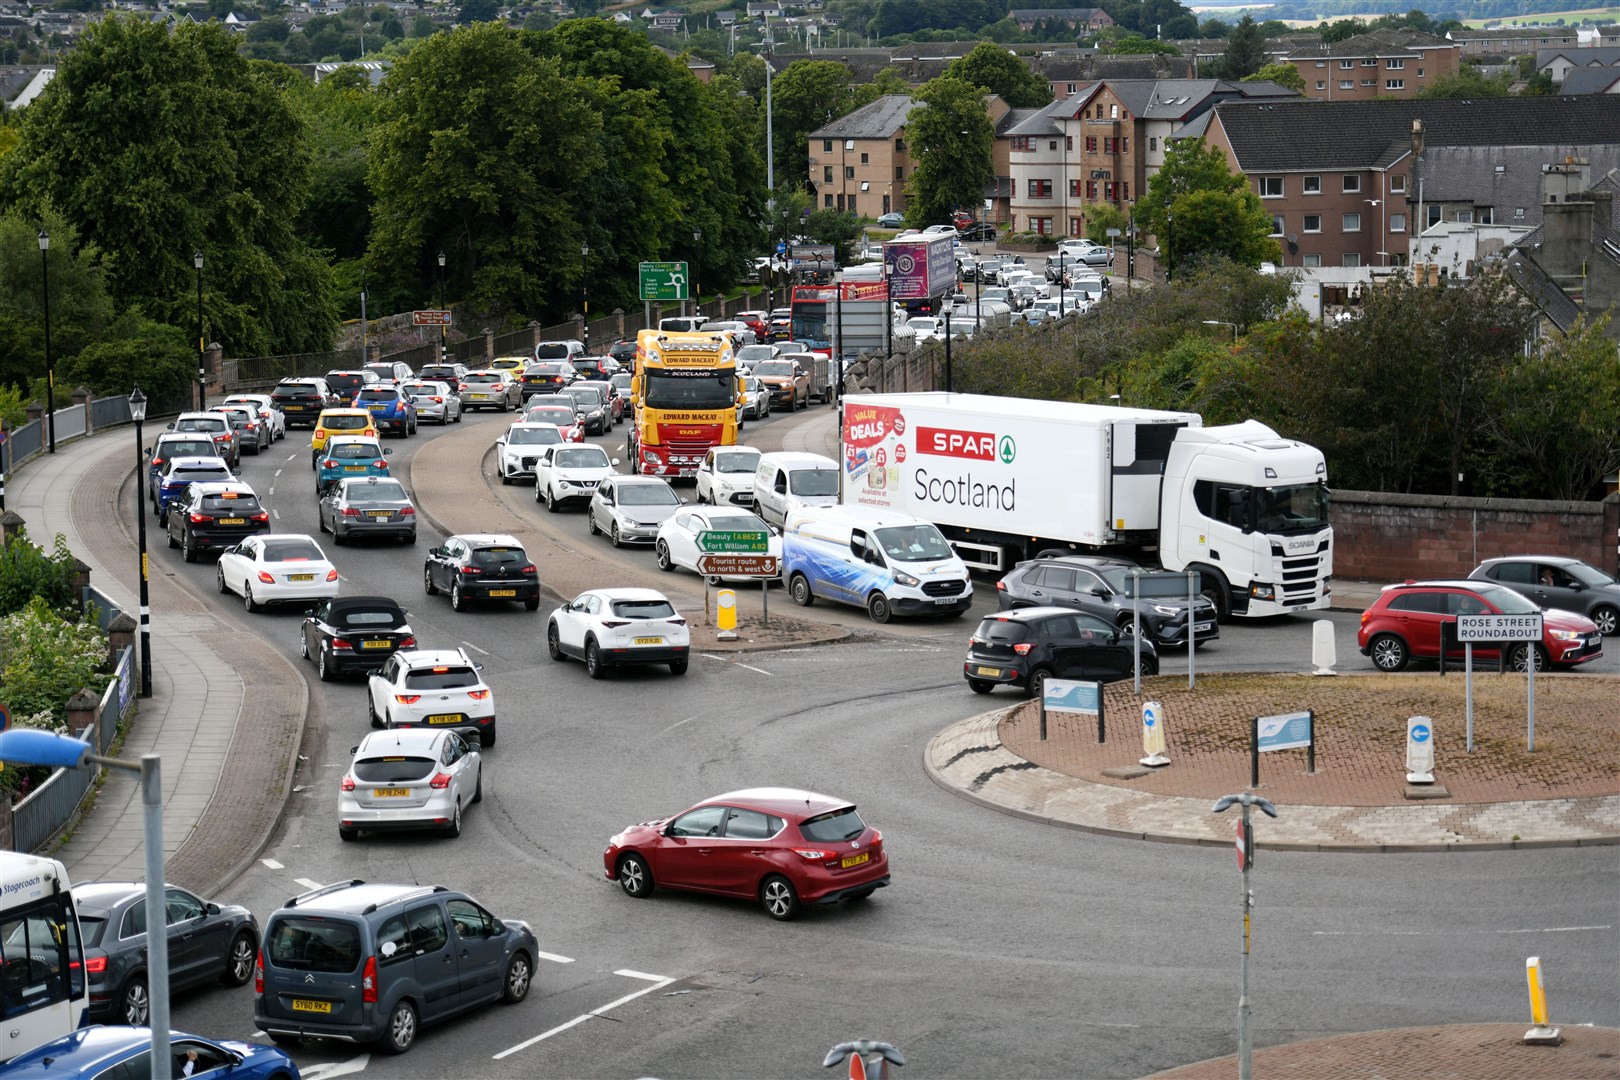 View from Rose Street car park, with traffic backed up on A82.